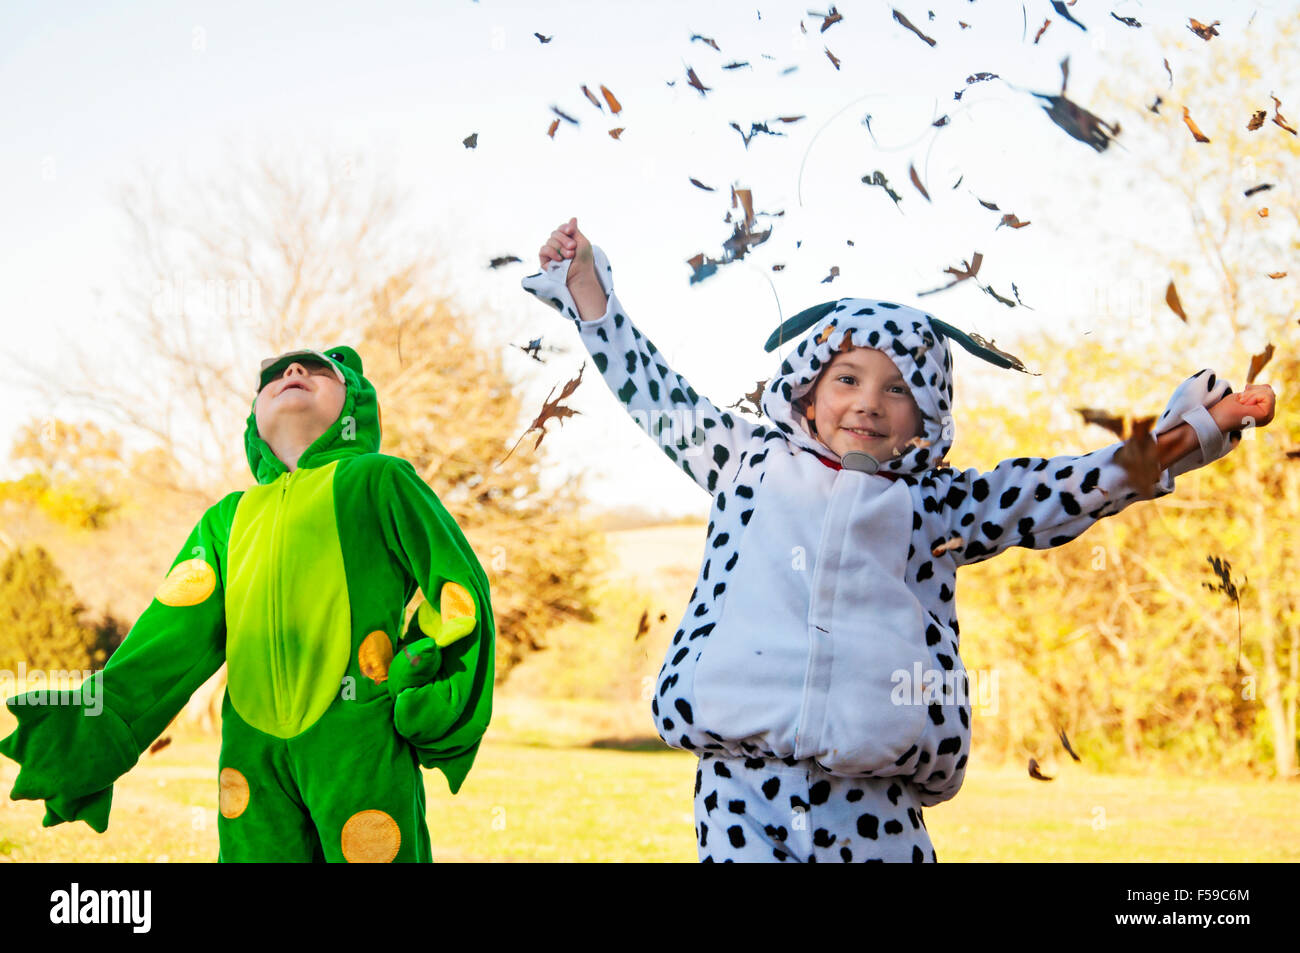 Two boys in costume catching and throwing leaves Stock Photo